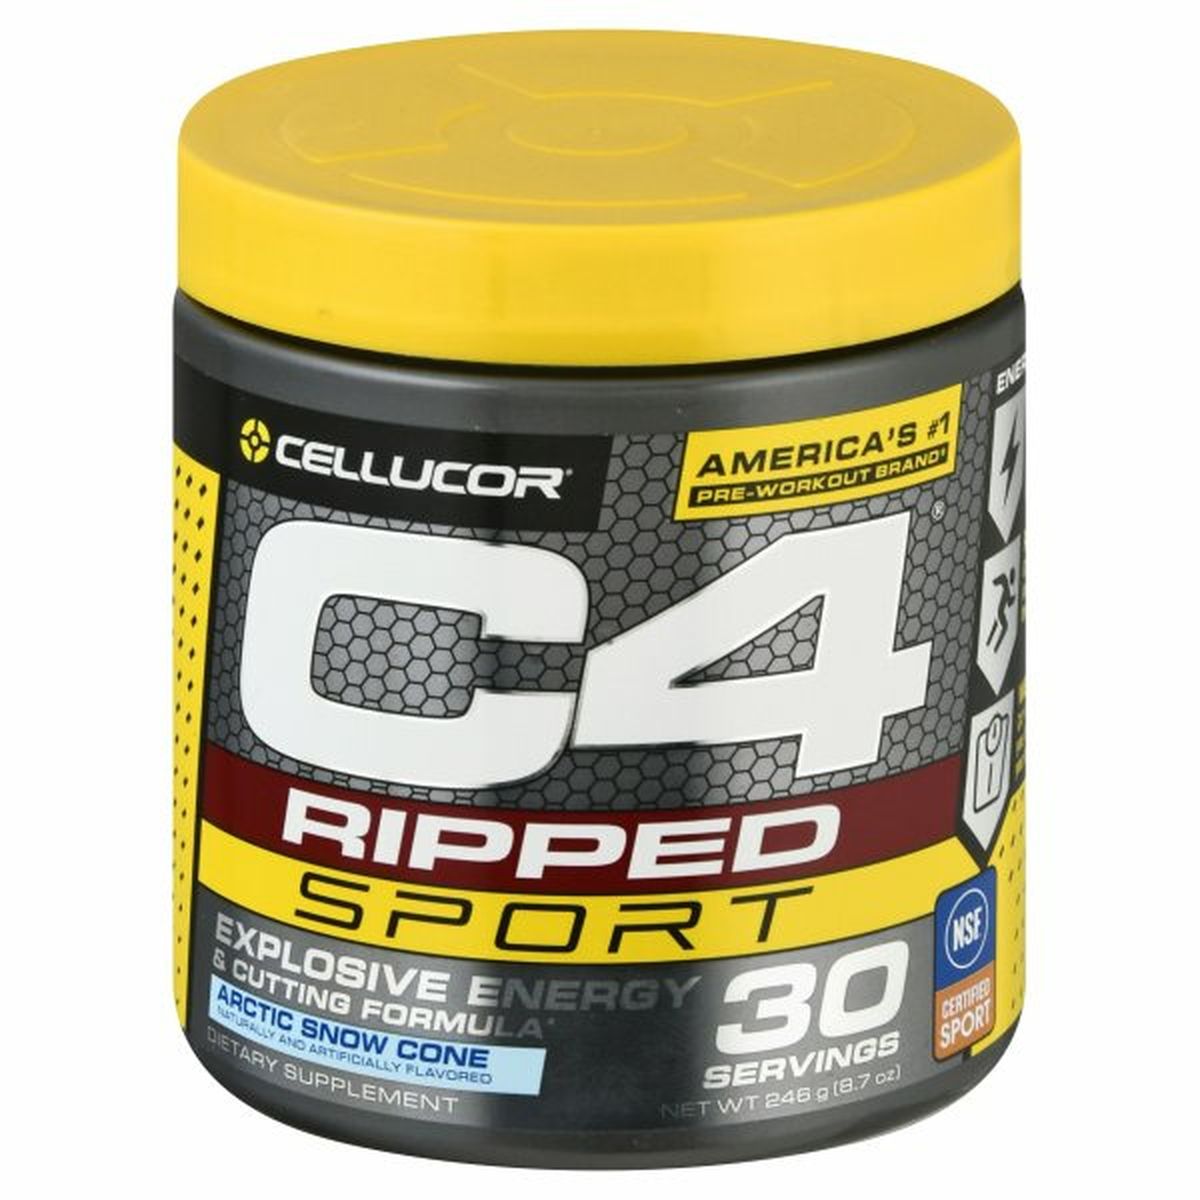 Calories in Cellucor Ripped Sport Pre-Workout, Arctic Snow Cone